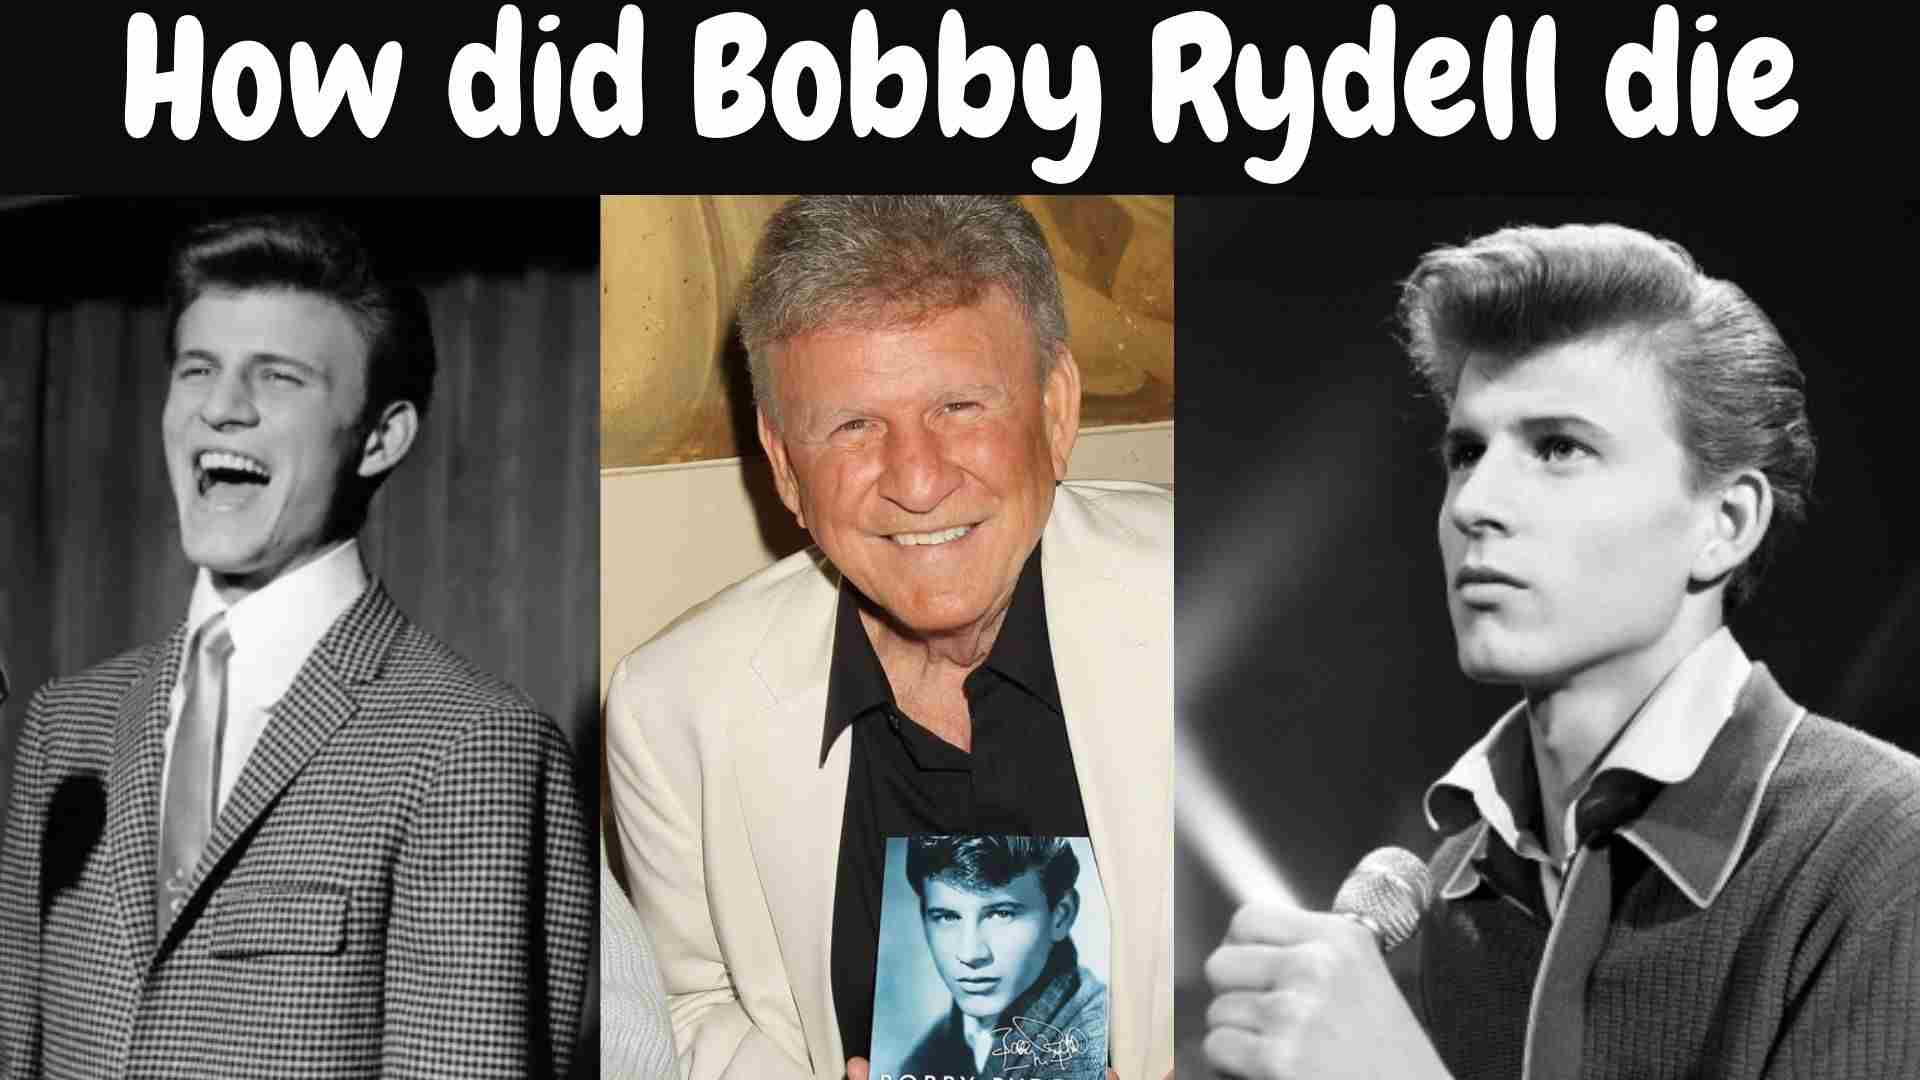 How did Bobby Rydell die wallpaper and images